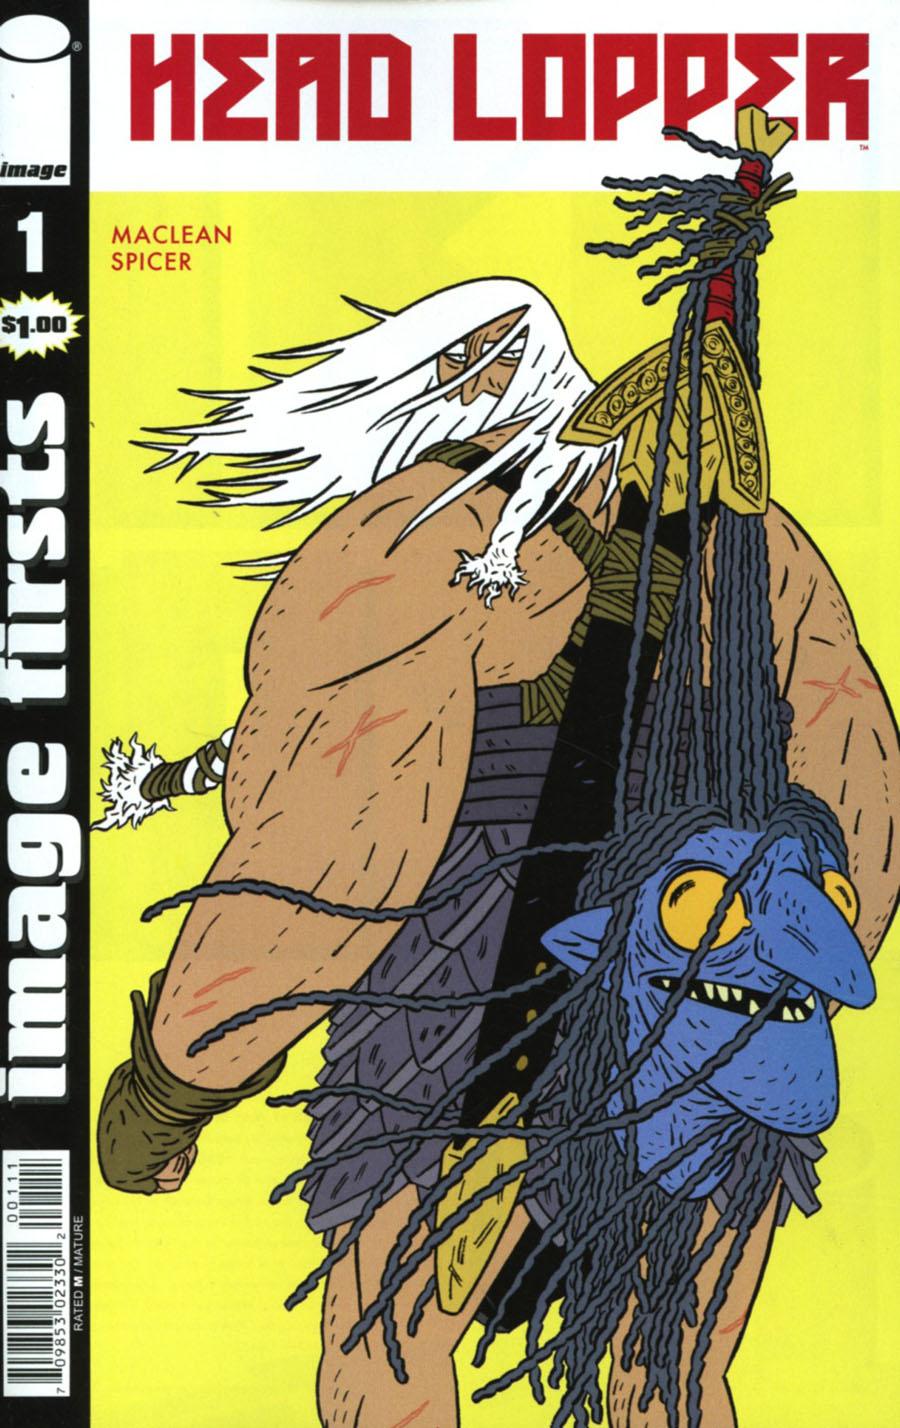 Image Firsts Head Lopper Vol. 1 #1